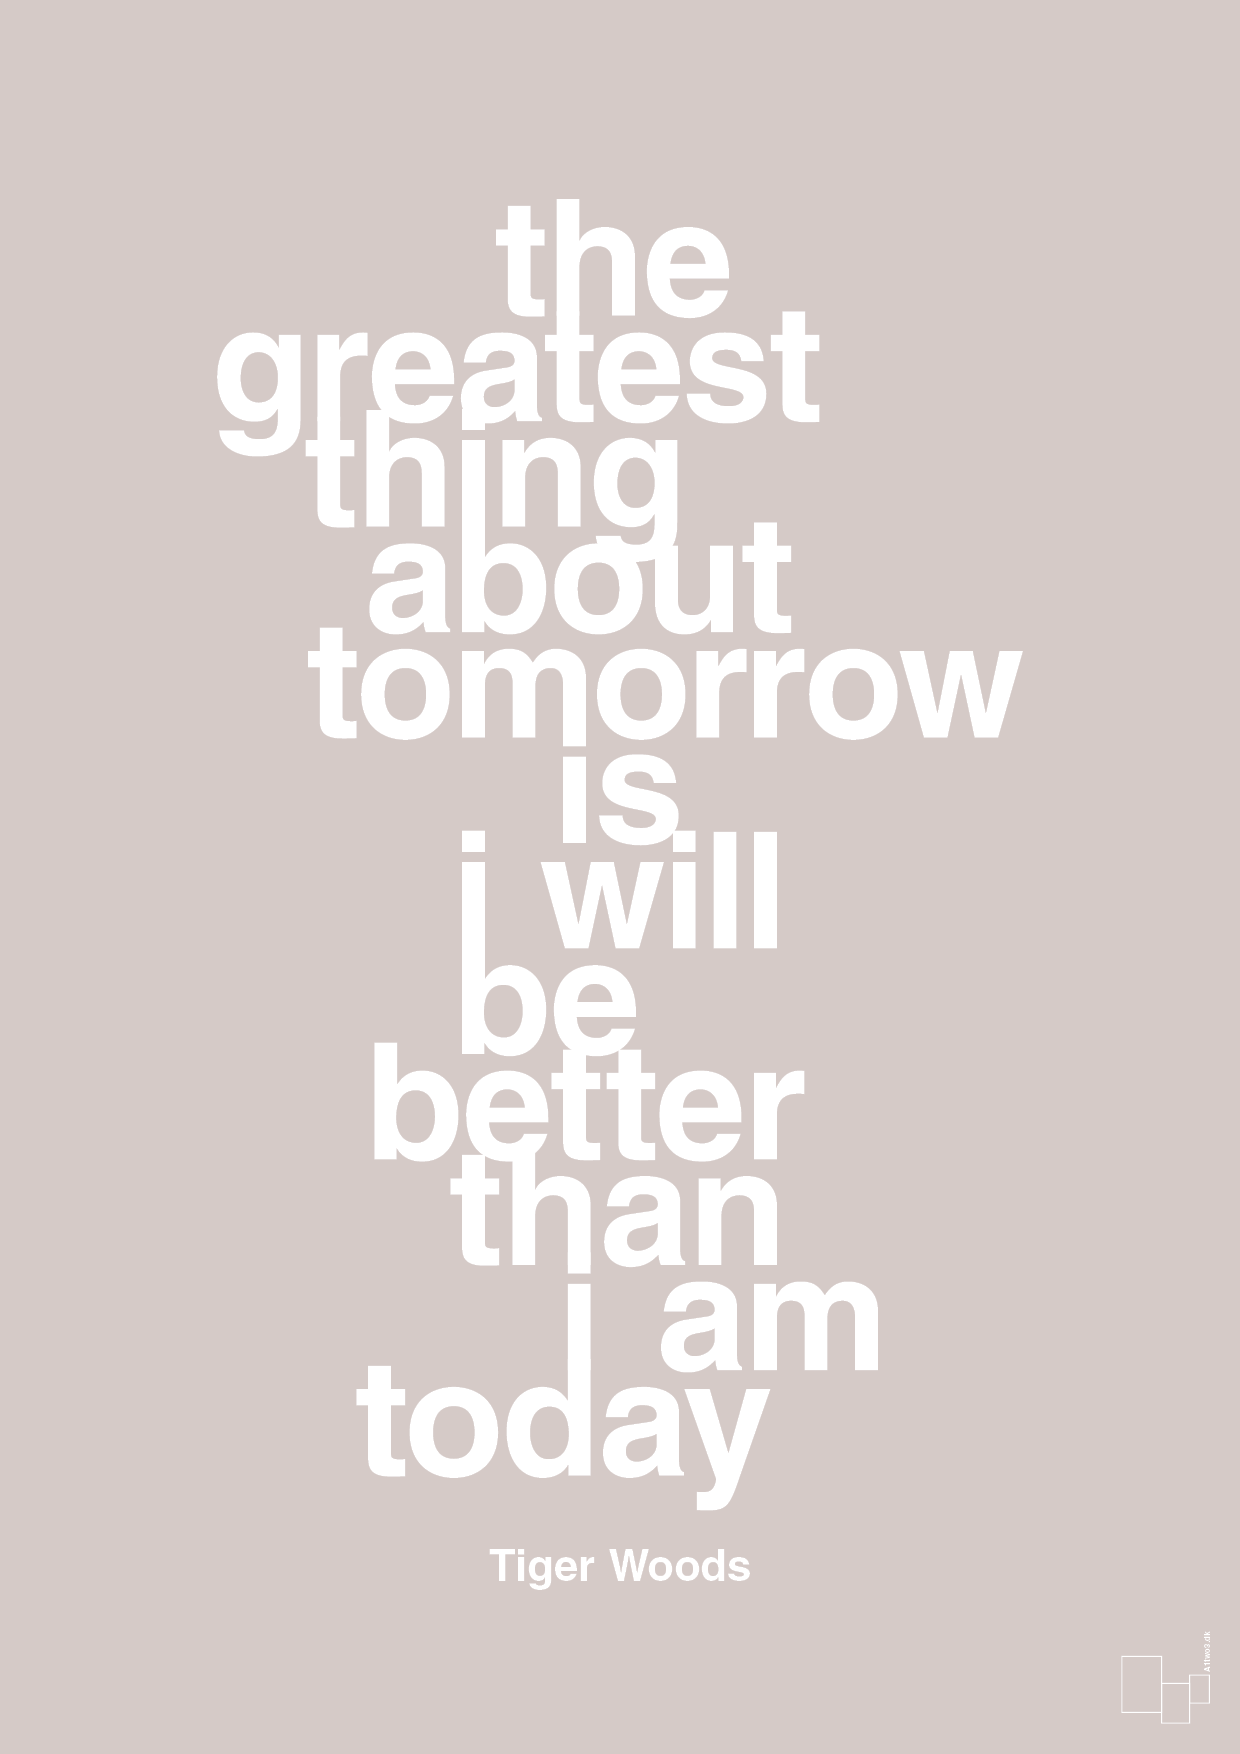 the greatest thing about tomorrow is i will be better than i am today - Plakat med Citater i Broken Beige